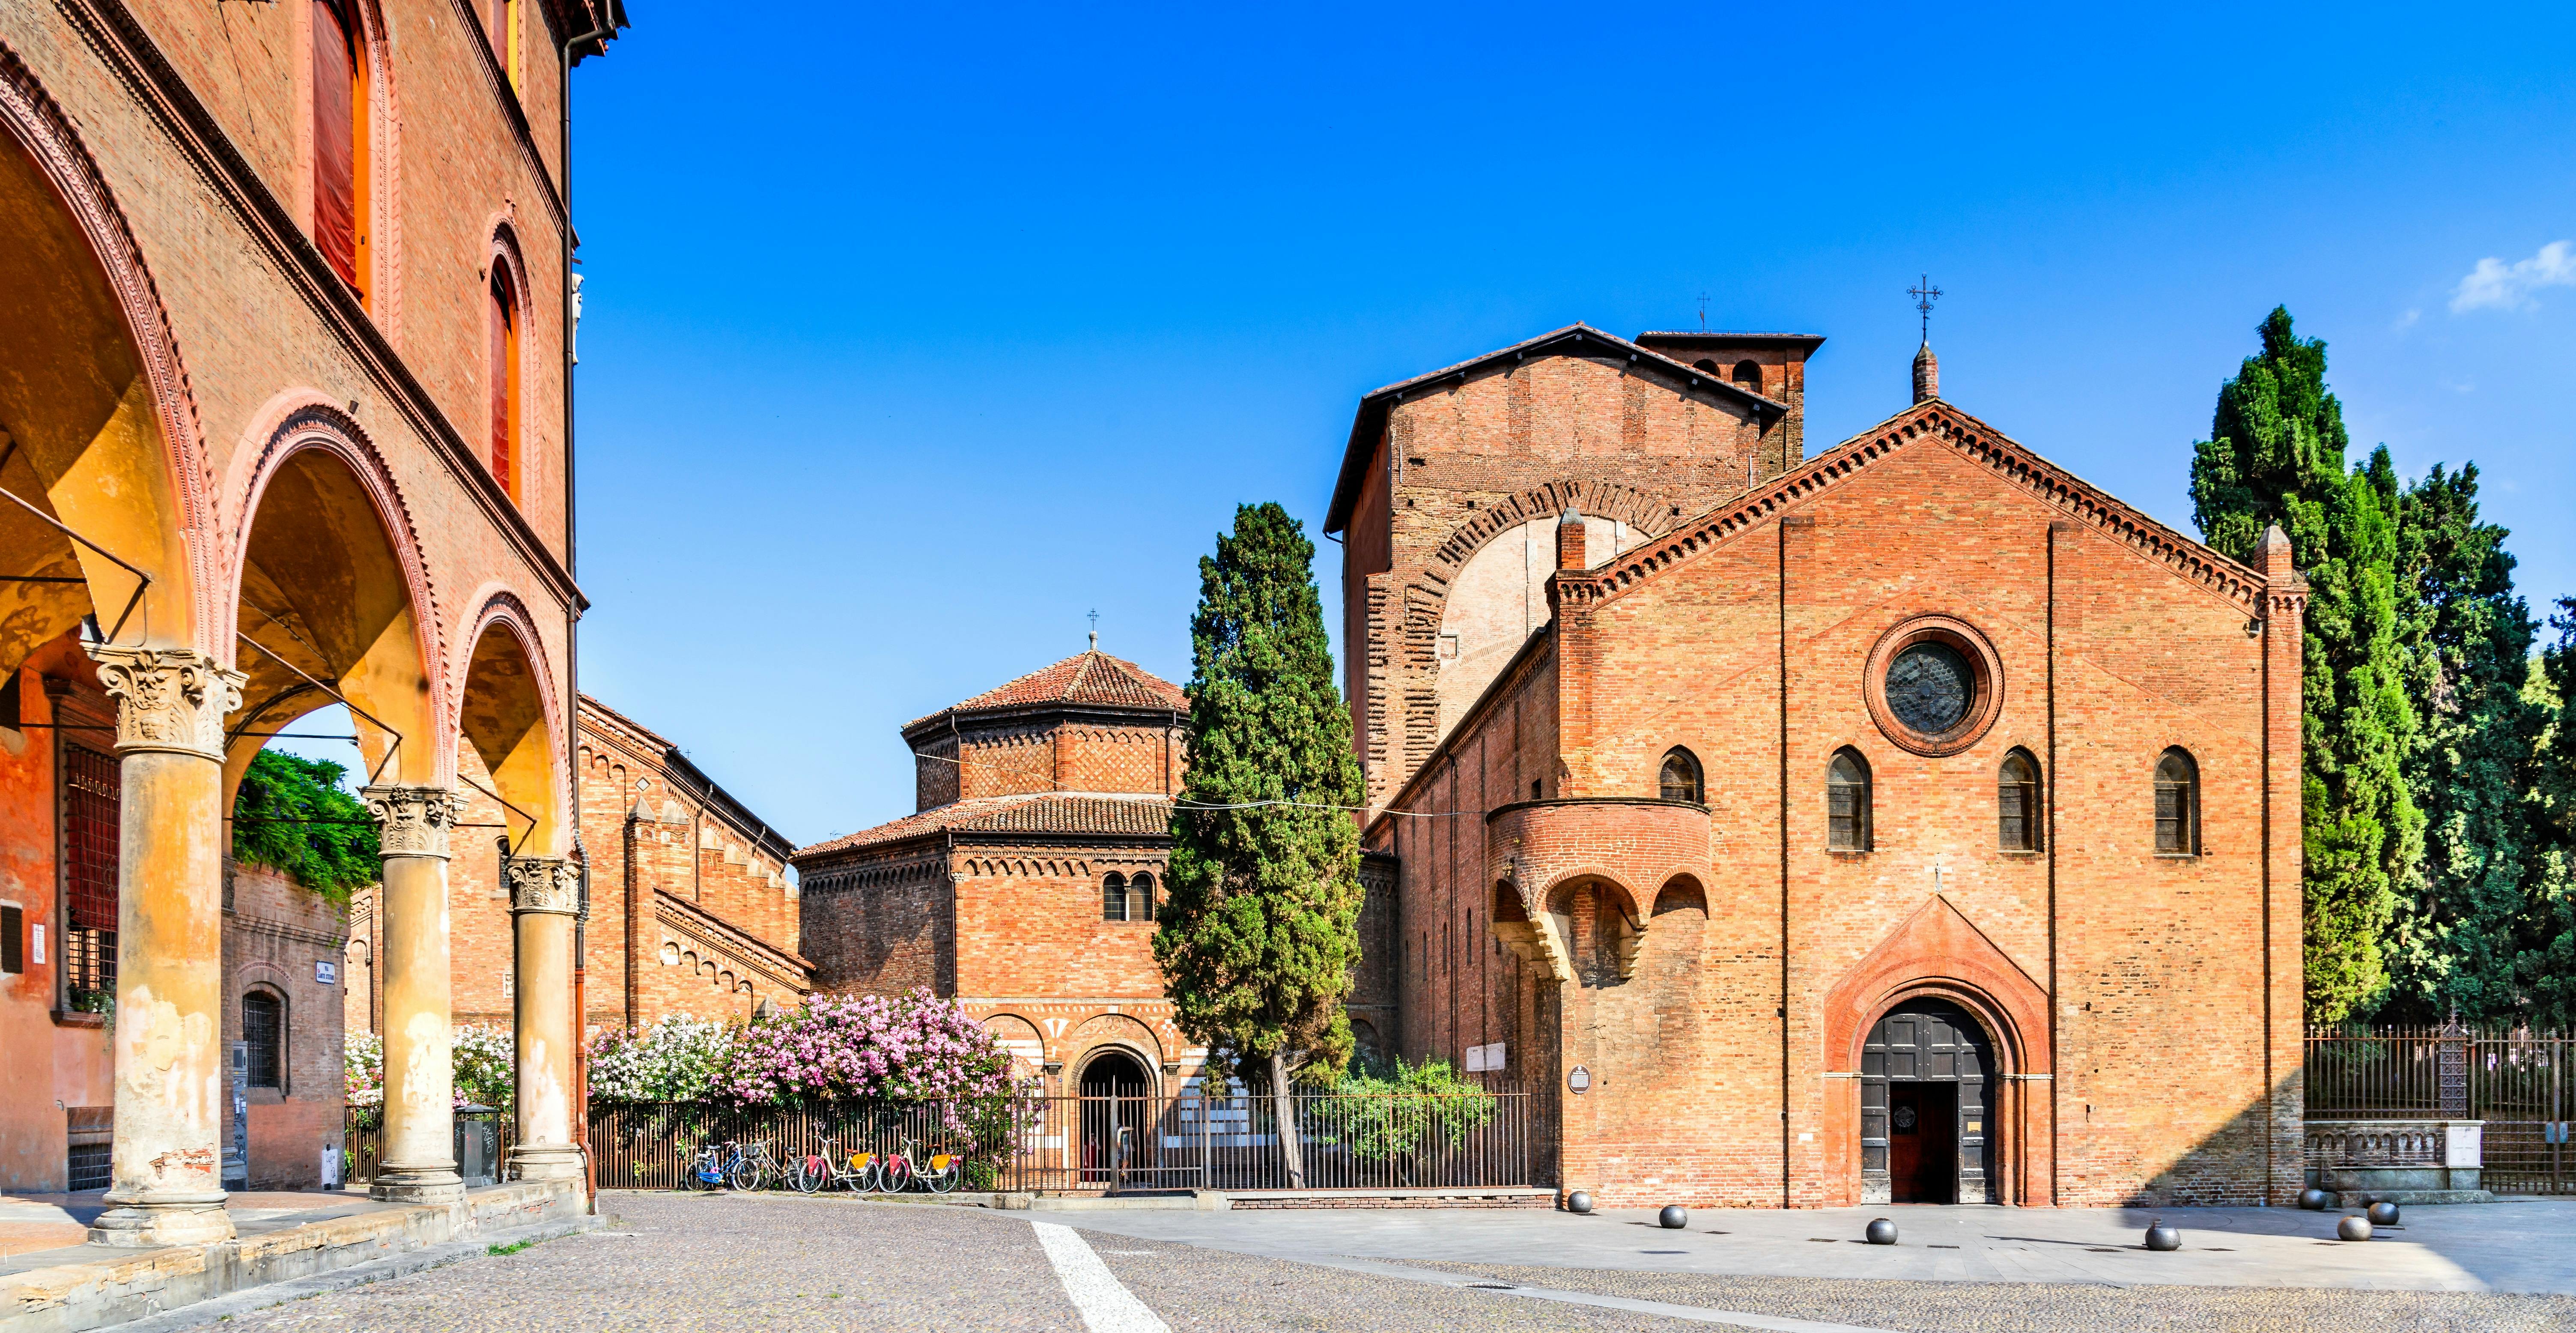 Private tour of the Basilica of Santo Stefano with tasting of local products